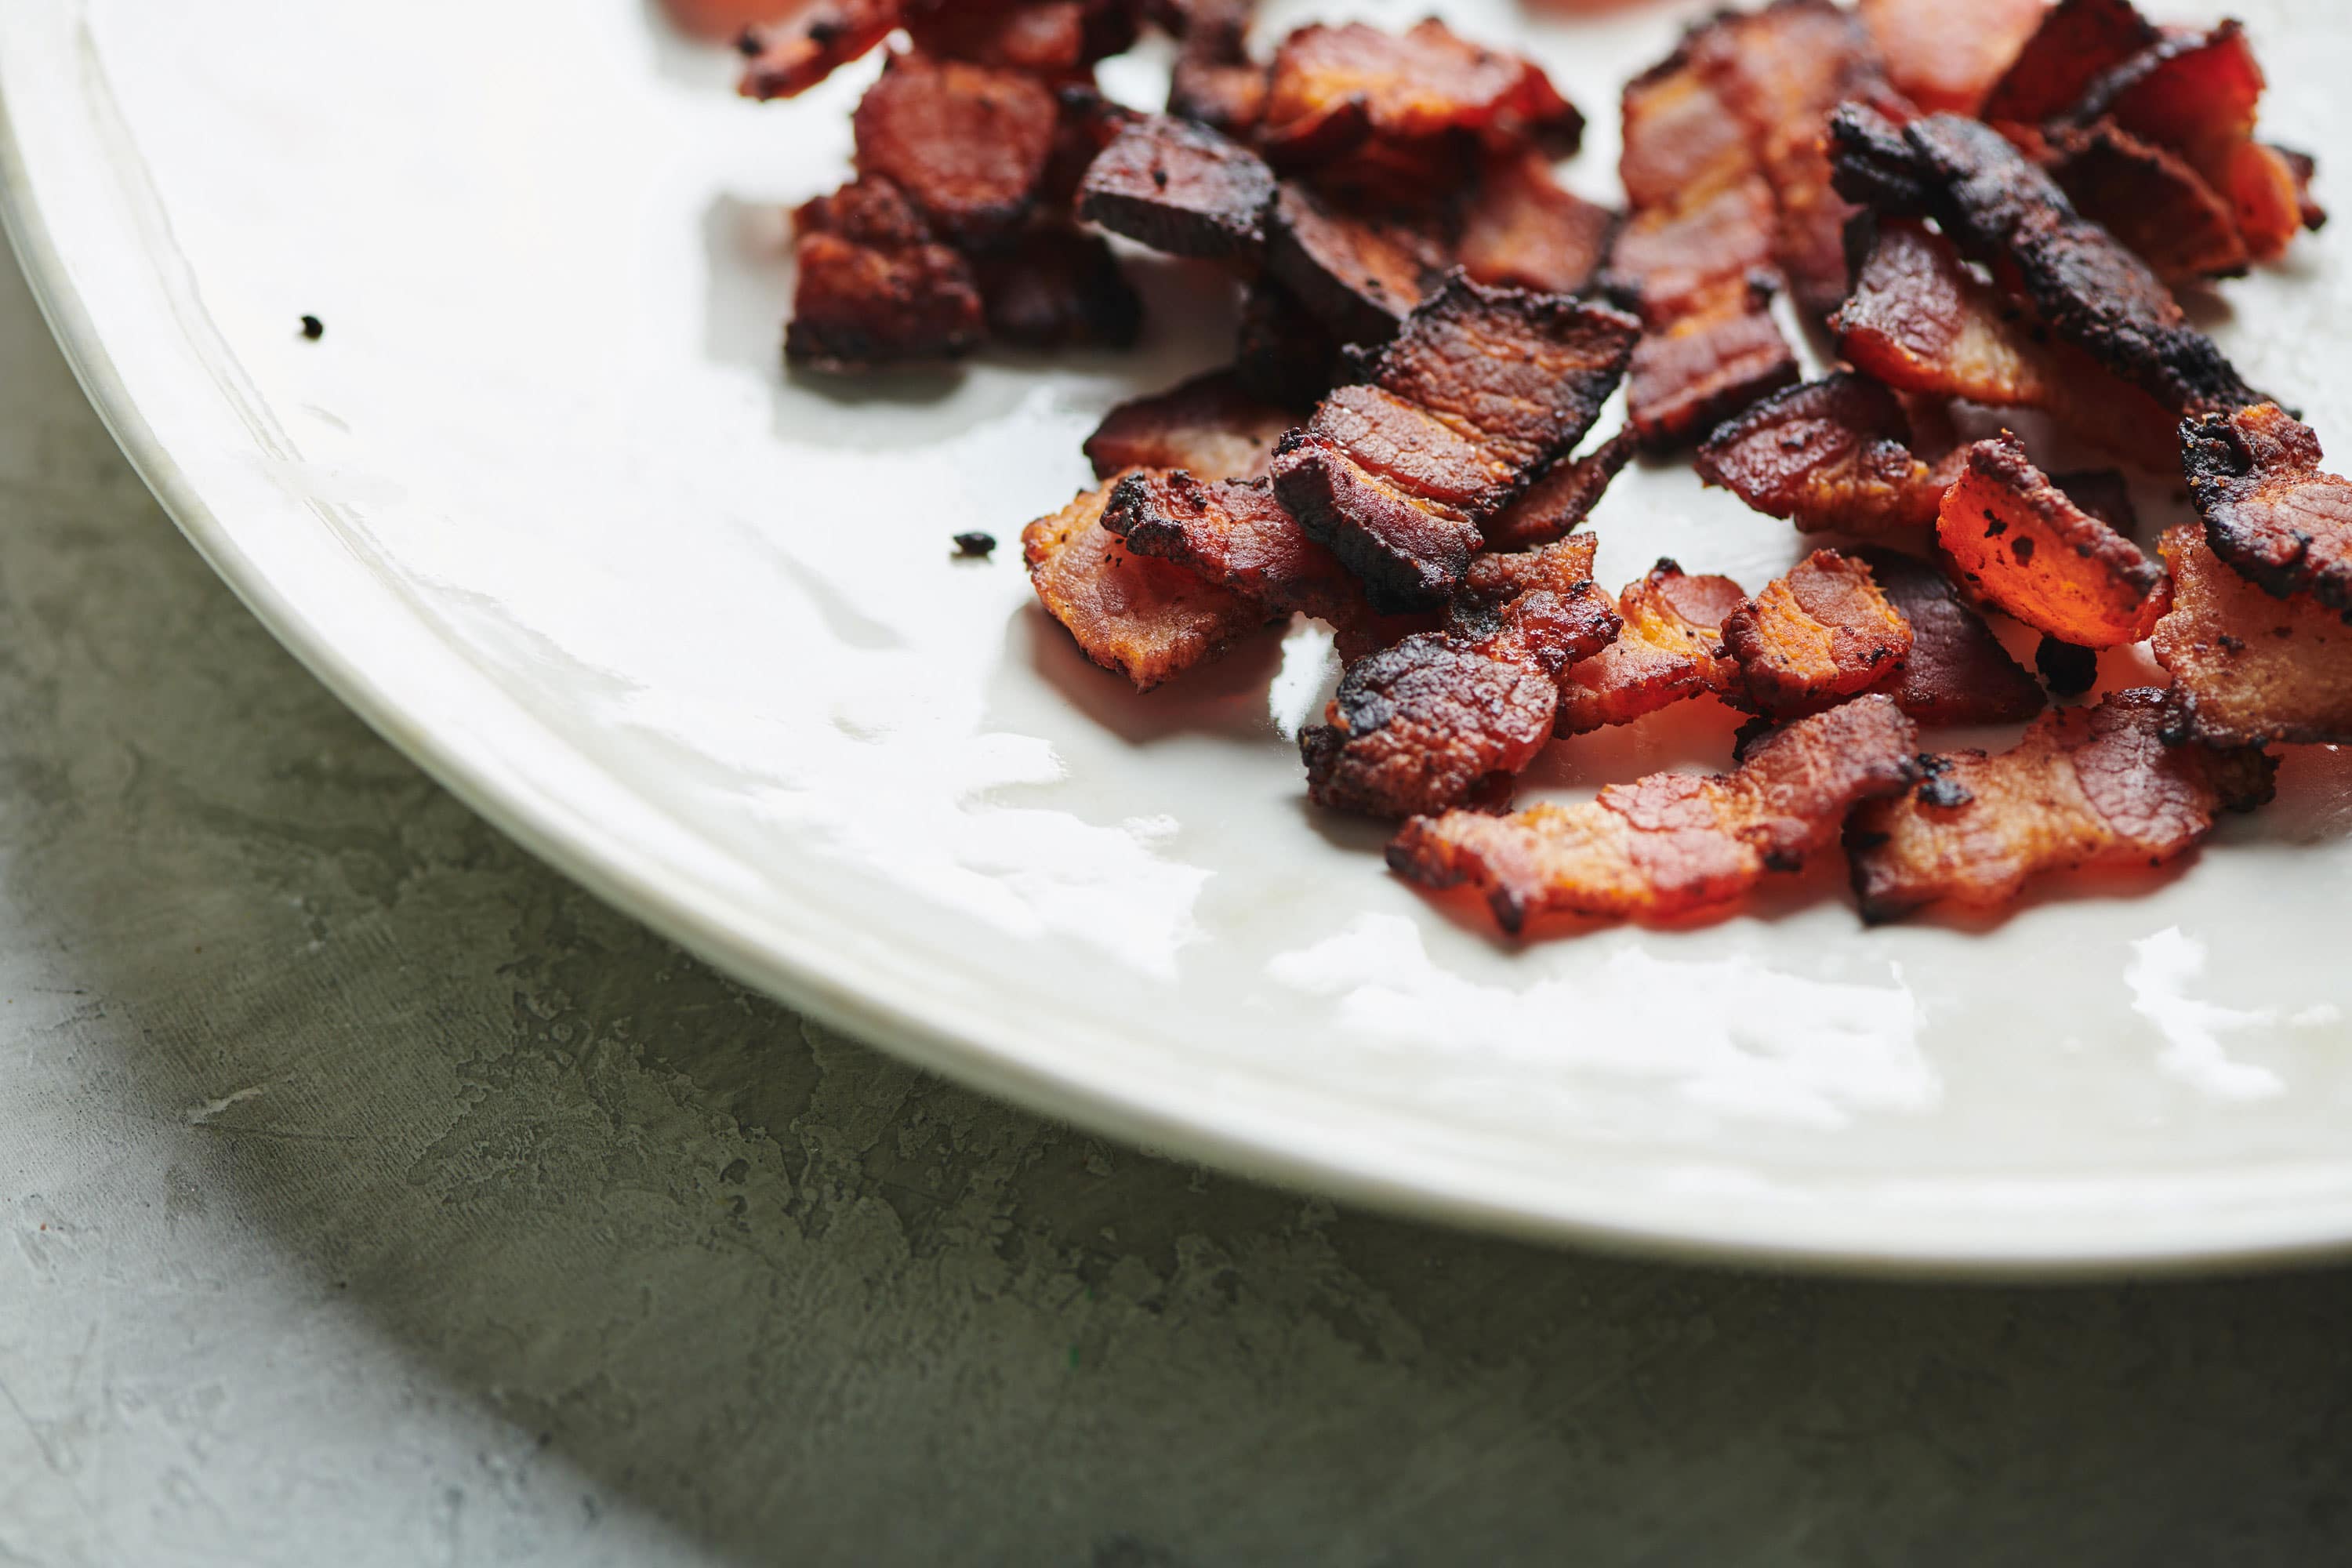 Cooked Bacon Lardons on a white plate.